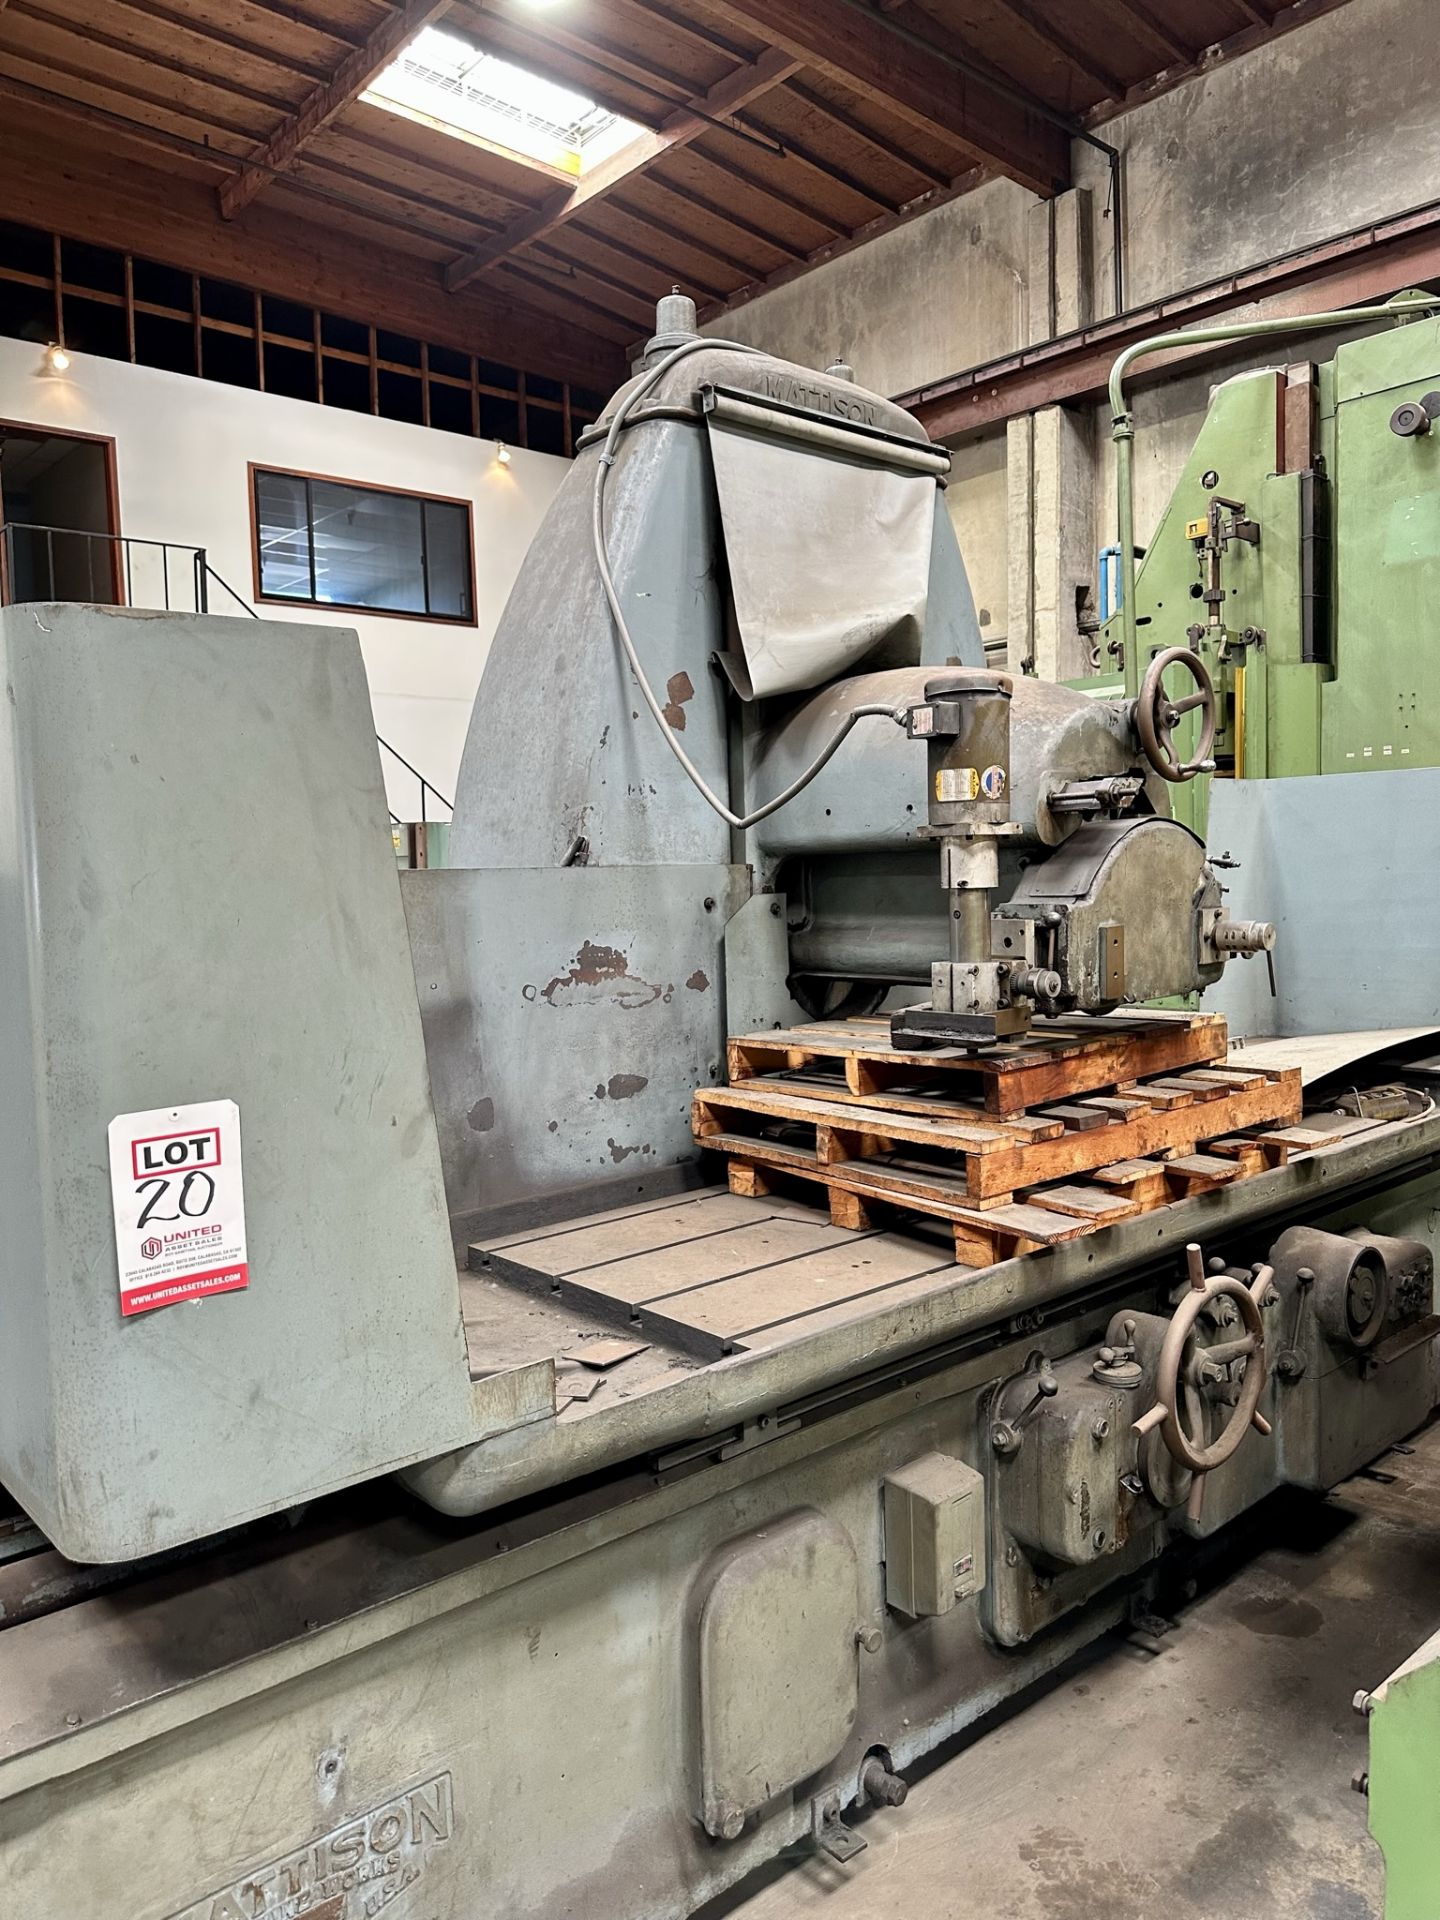 MATTISON SURFACE GRINDER, 104" X 36" WORKING SURFACE, USED, (LOCATION: SANTA FE SPRINGS, CA) - Image 2 of 10